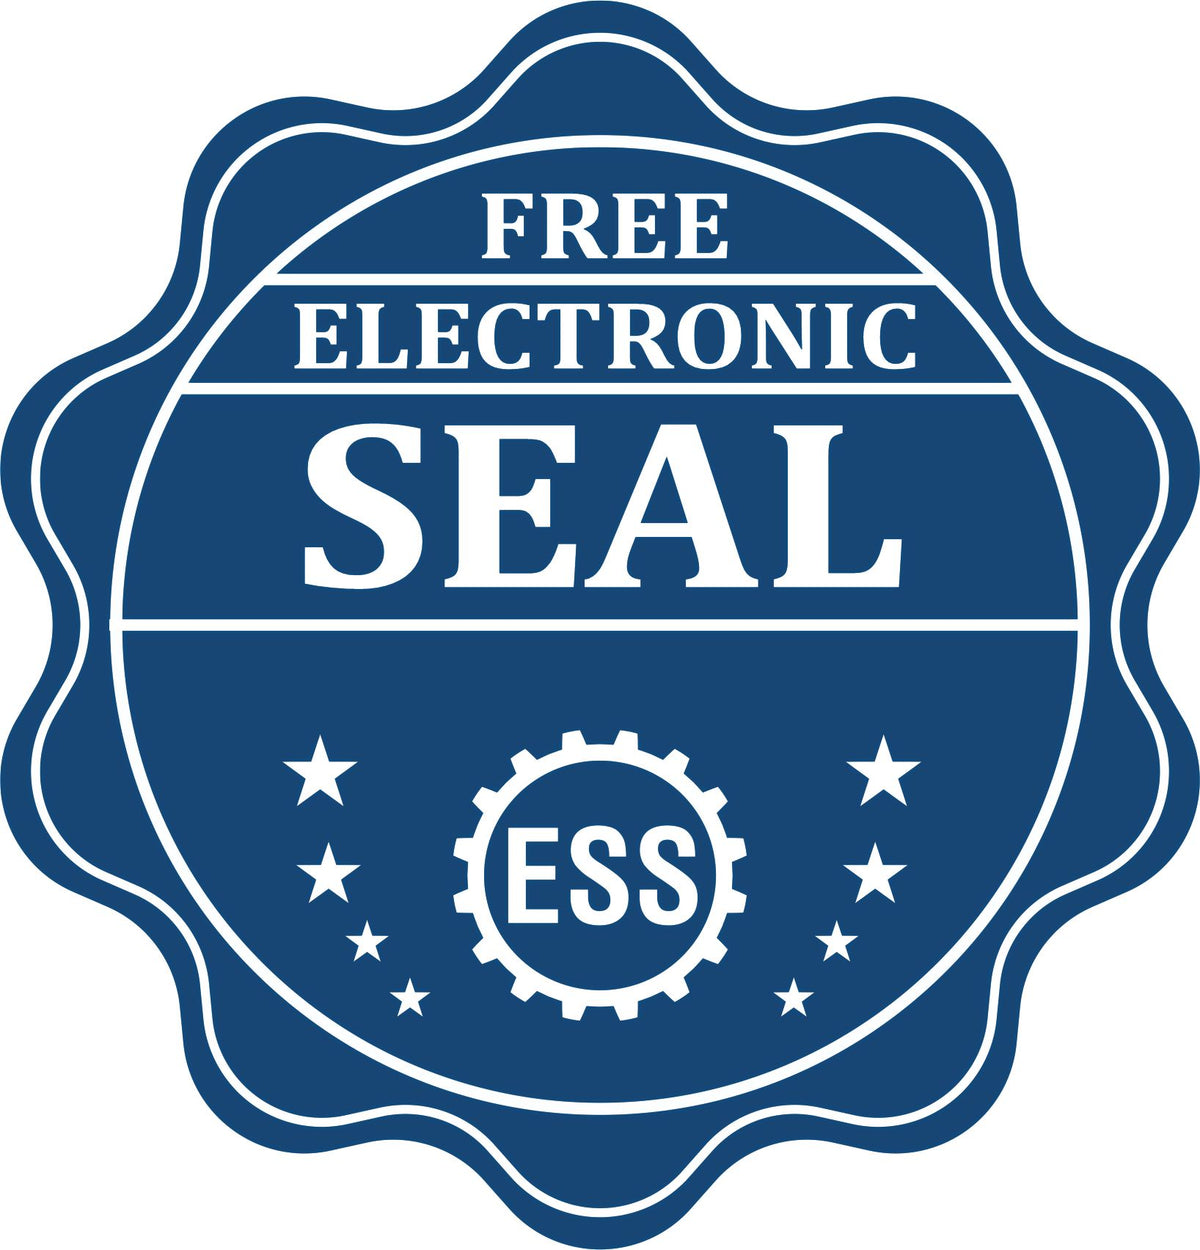 A badge showing a free electronic seal for the Heavy Duty Cast Iron Minnesota Architect Embosser with stars and the ESS gear on the emblem.